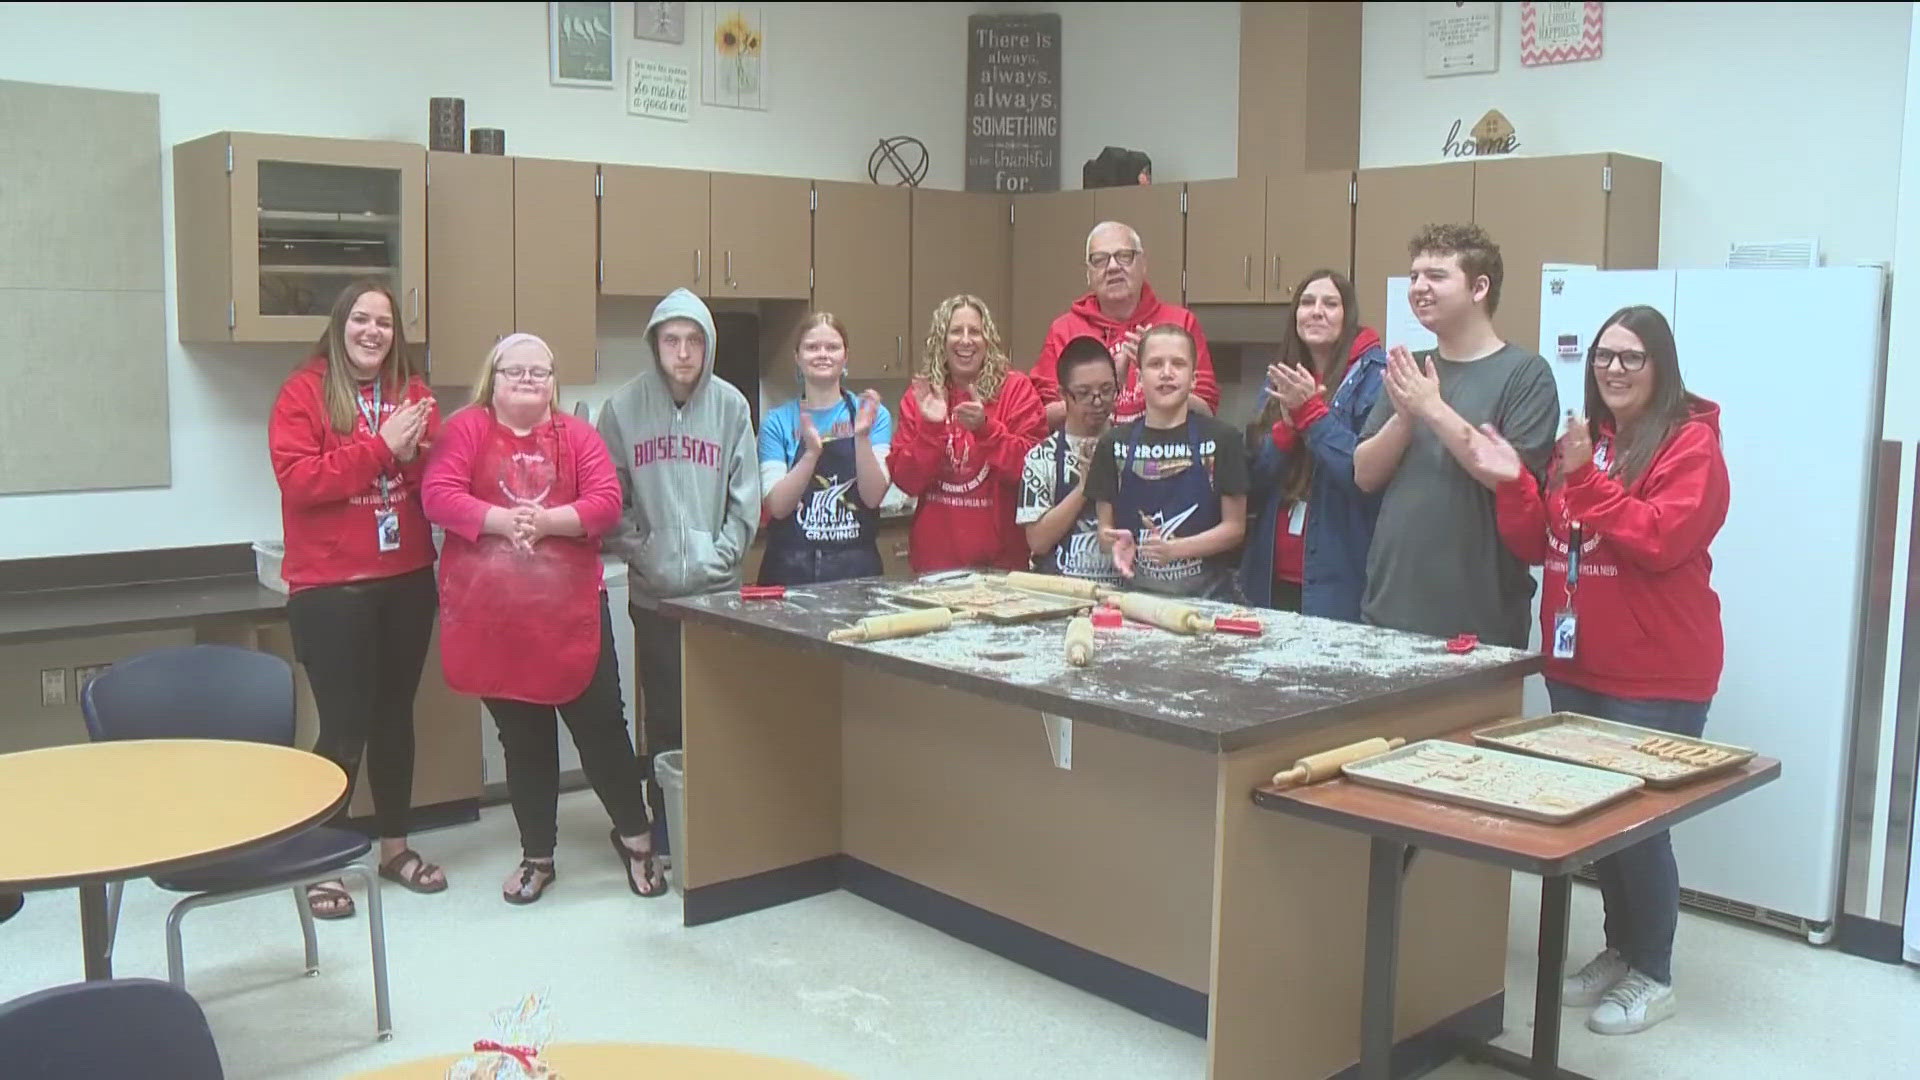 The special education students at Middleton High School have their own bakery, called "The Barkery." They make and sell dog biscuits that dogs love.